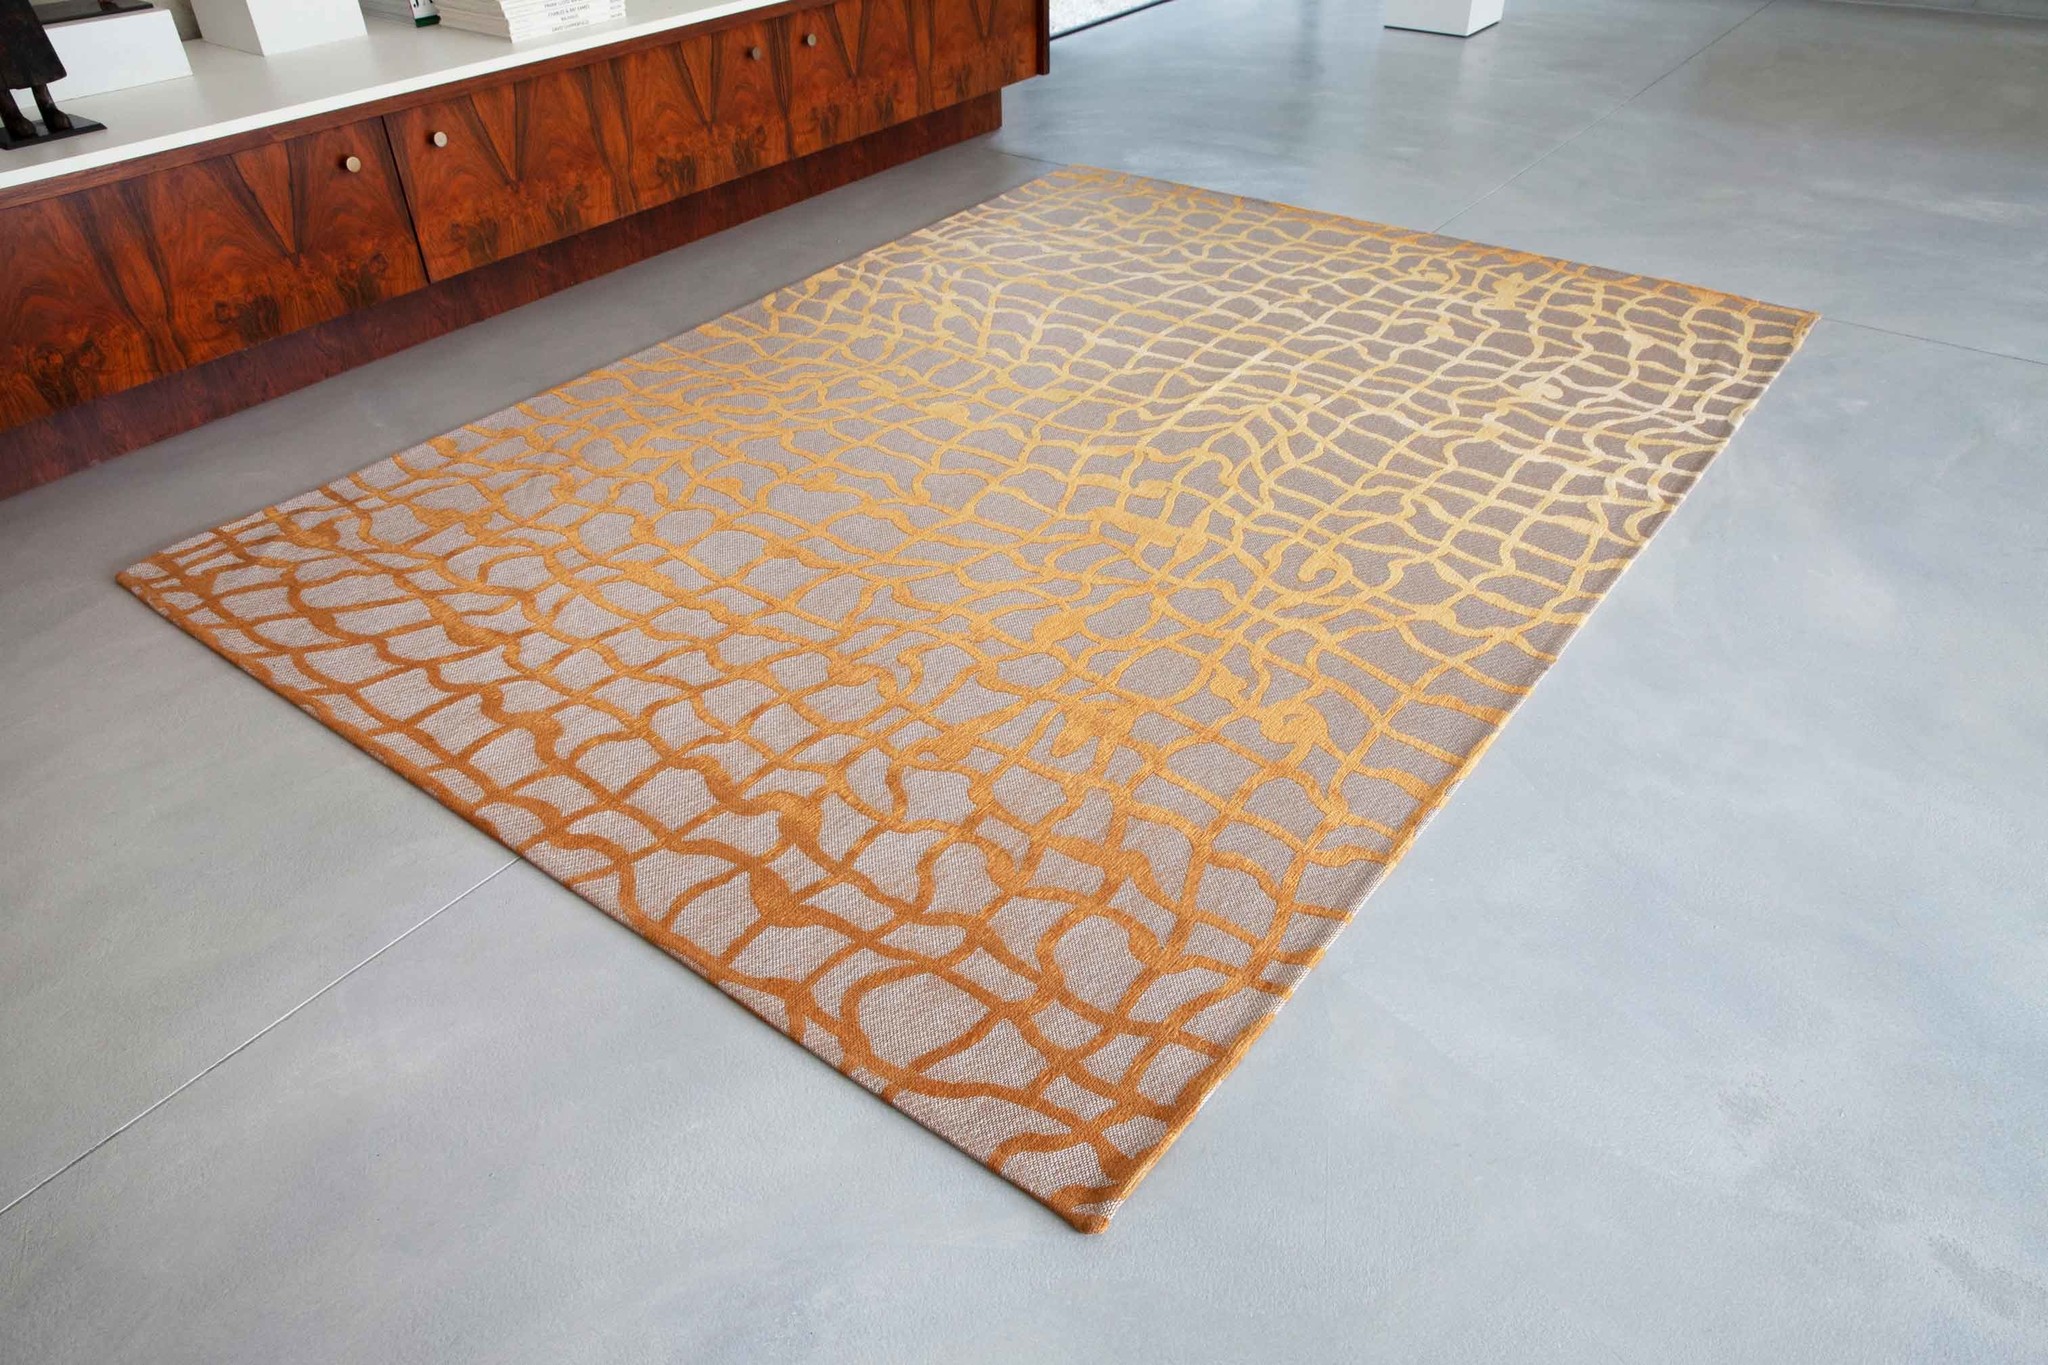 Gold Flatwoven Rug ☞ Size: 6' 7" x 9' 2" (200 x 280 cm)